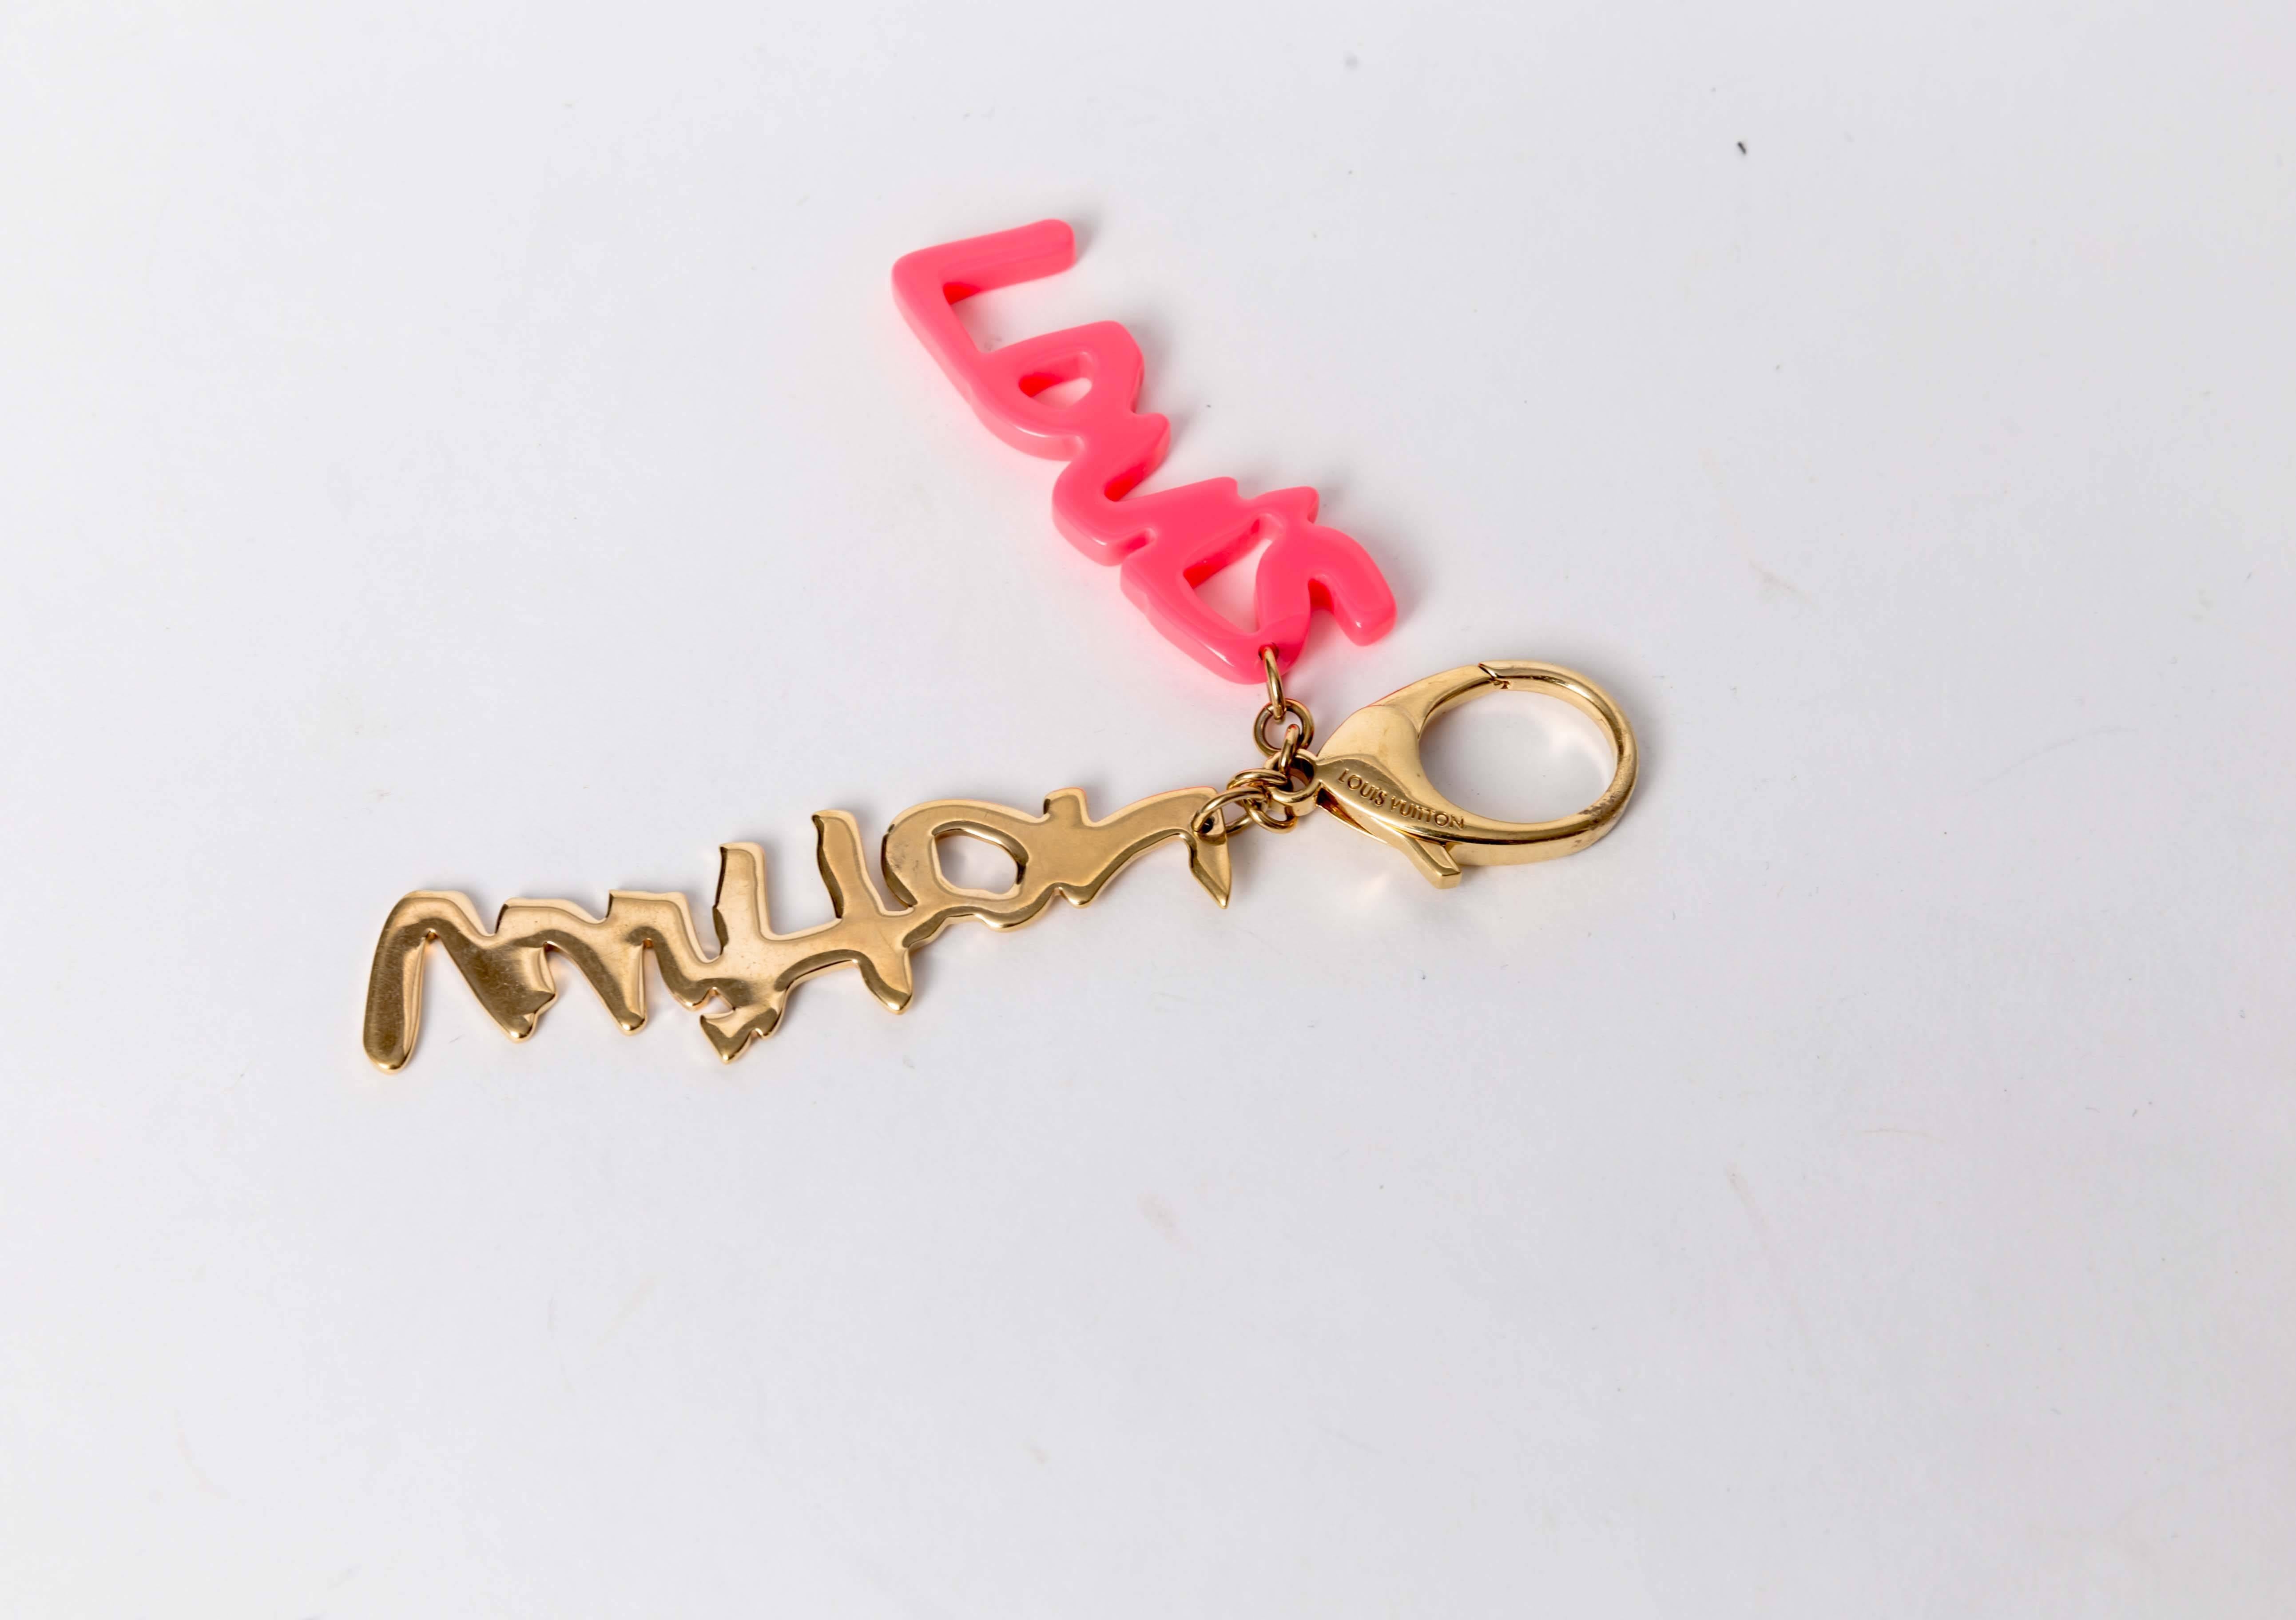 Louis Vuitton Stephen Sprouse Gold Tone Pink Resin Graffiti Keychain Bag Charm. Limited edition item designed in 2009 by Marc Jacobs for Louis Vuitton as a tribute to revolutionary fashion designer, Stephen Sprouse. Gold tone metal & neon pink